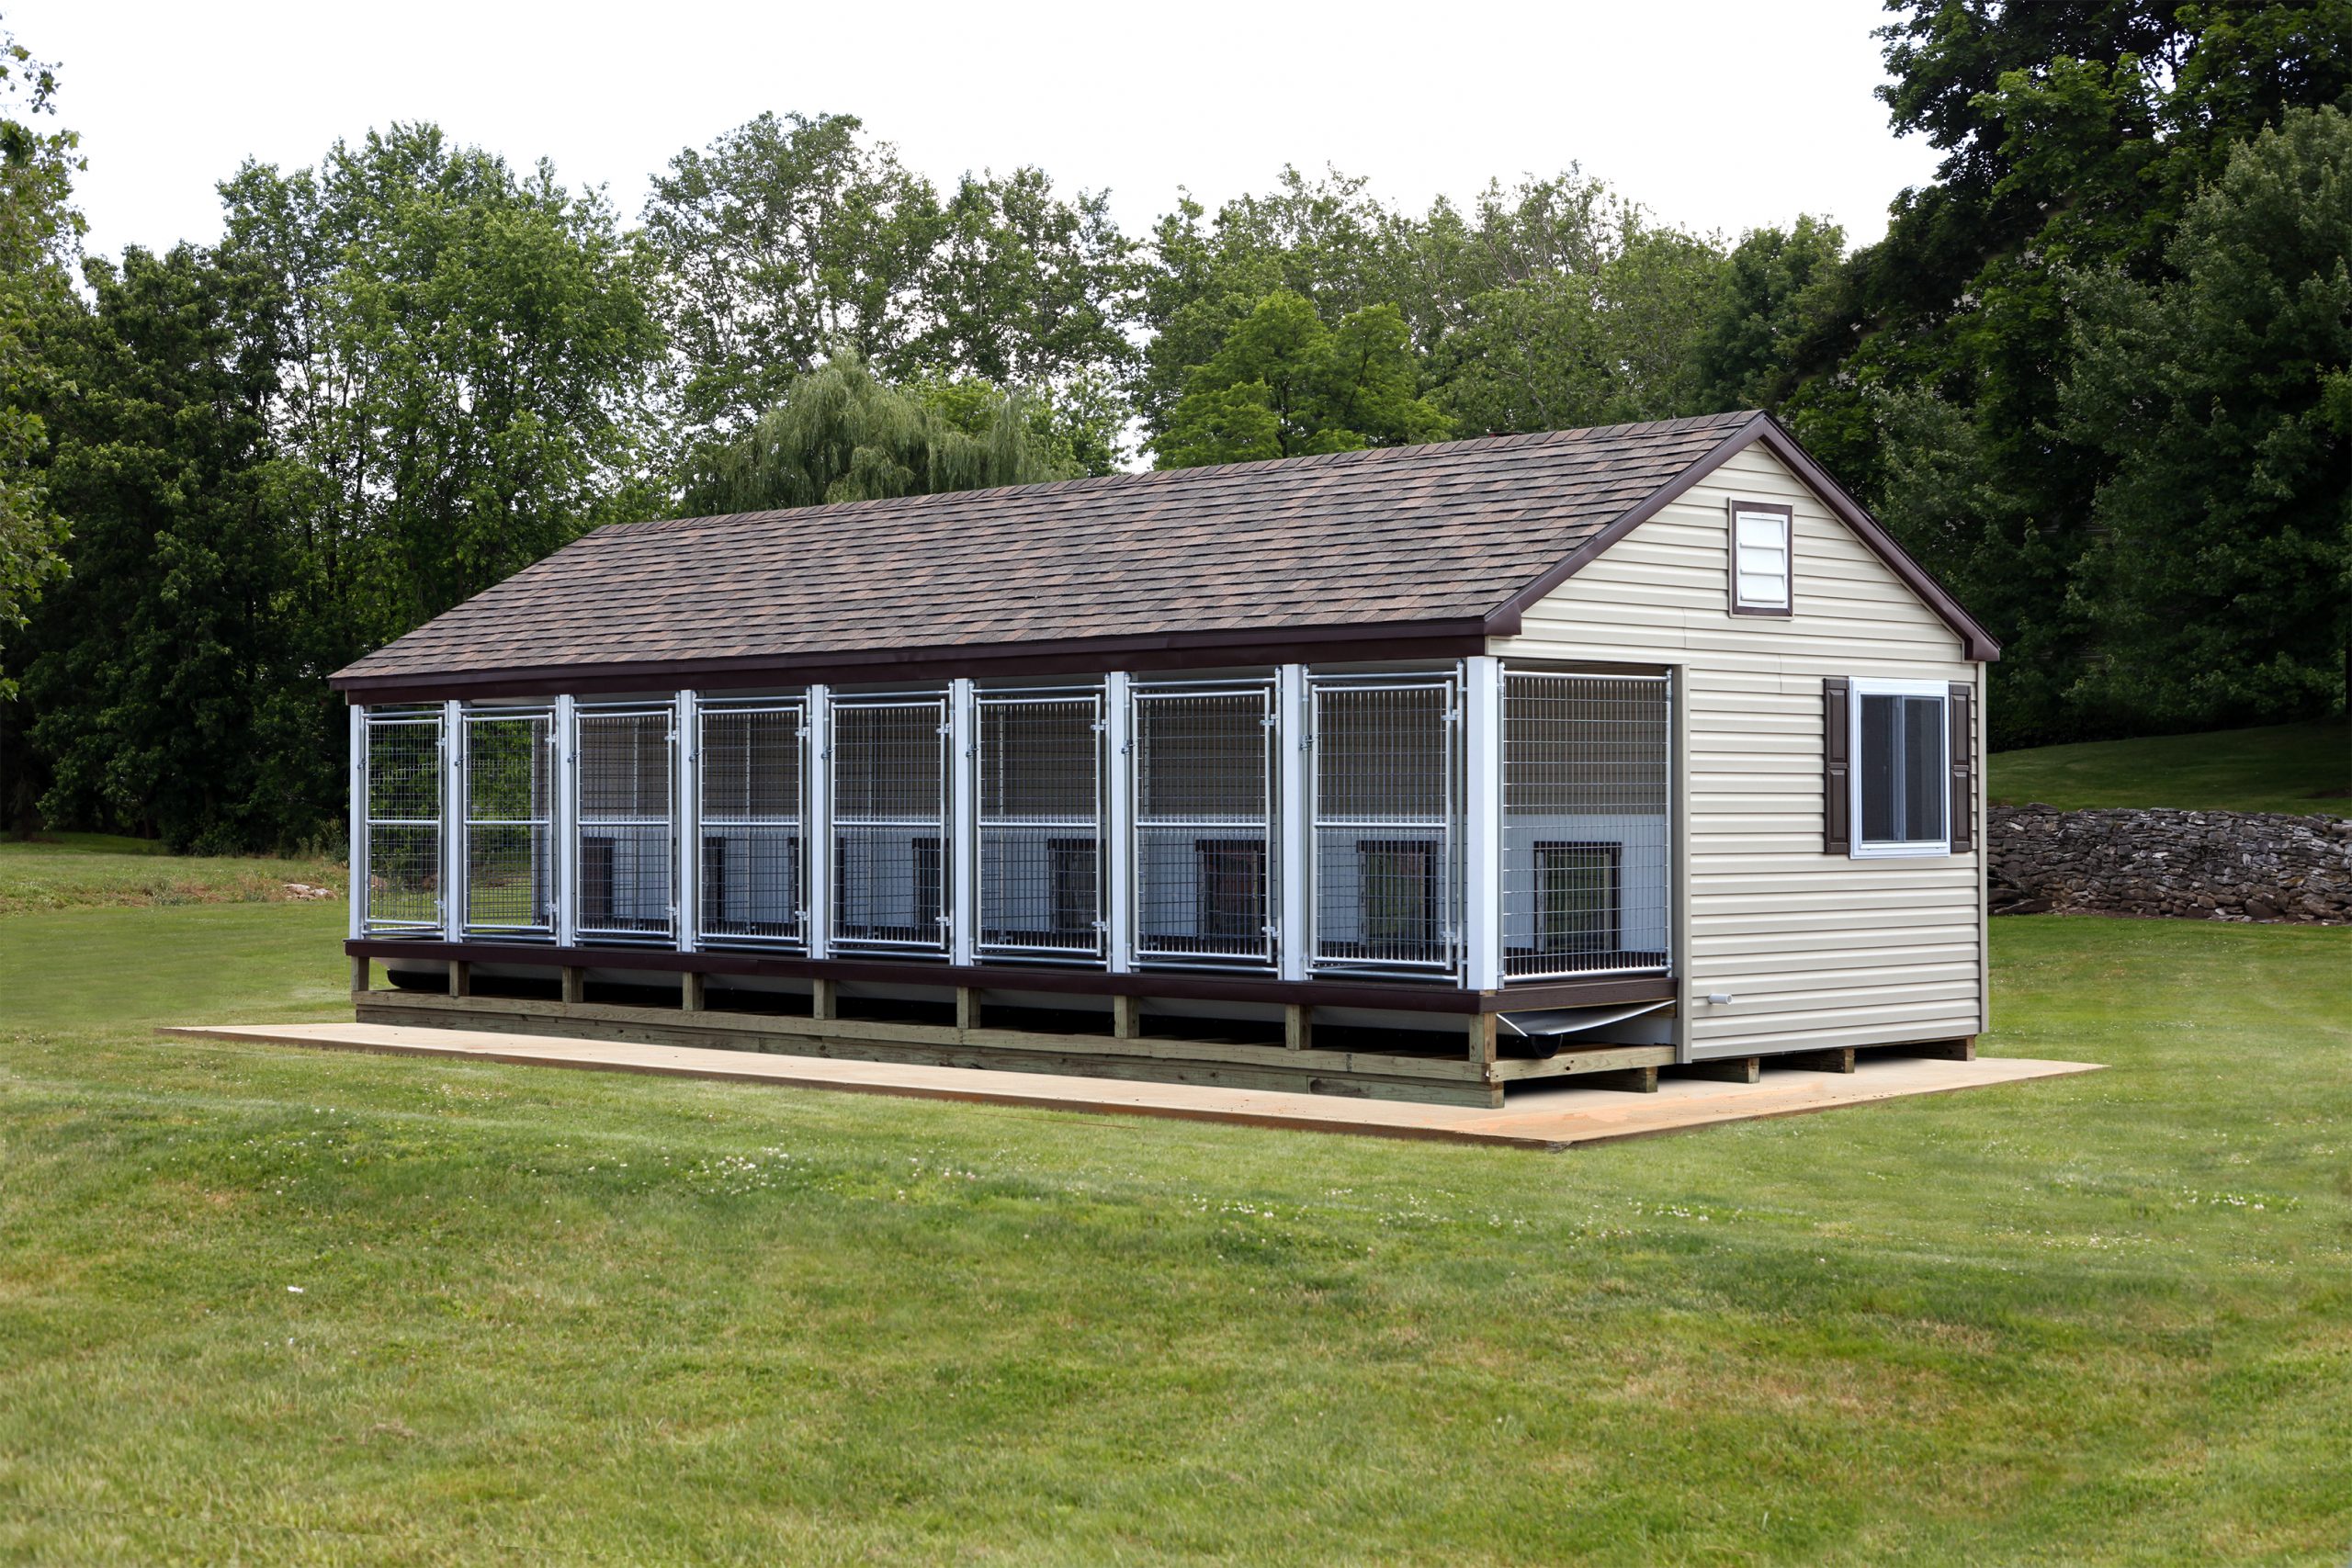 14x32 commercial kennel with 8 dog runs, tan siding, brown roofing, and white trim.